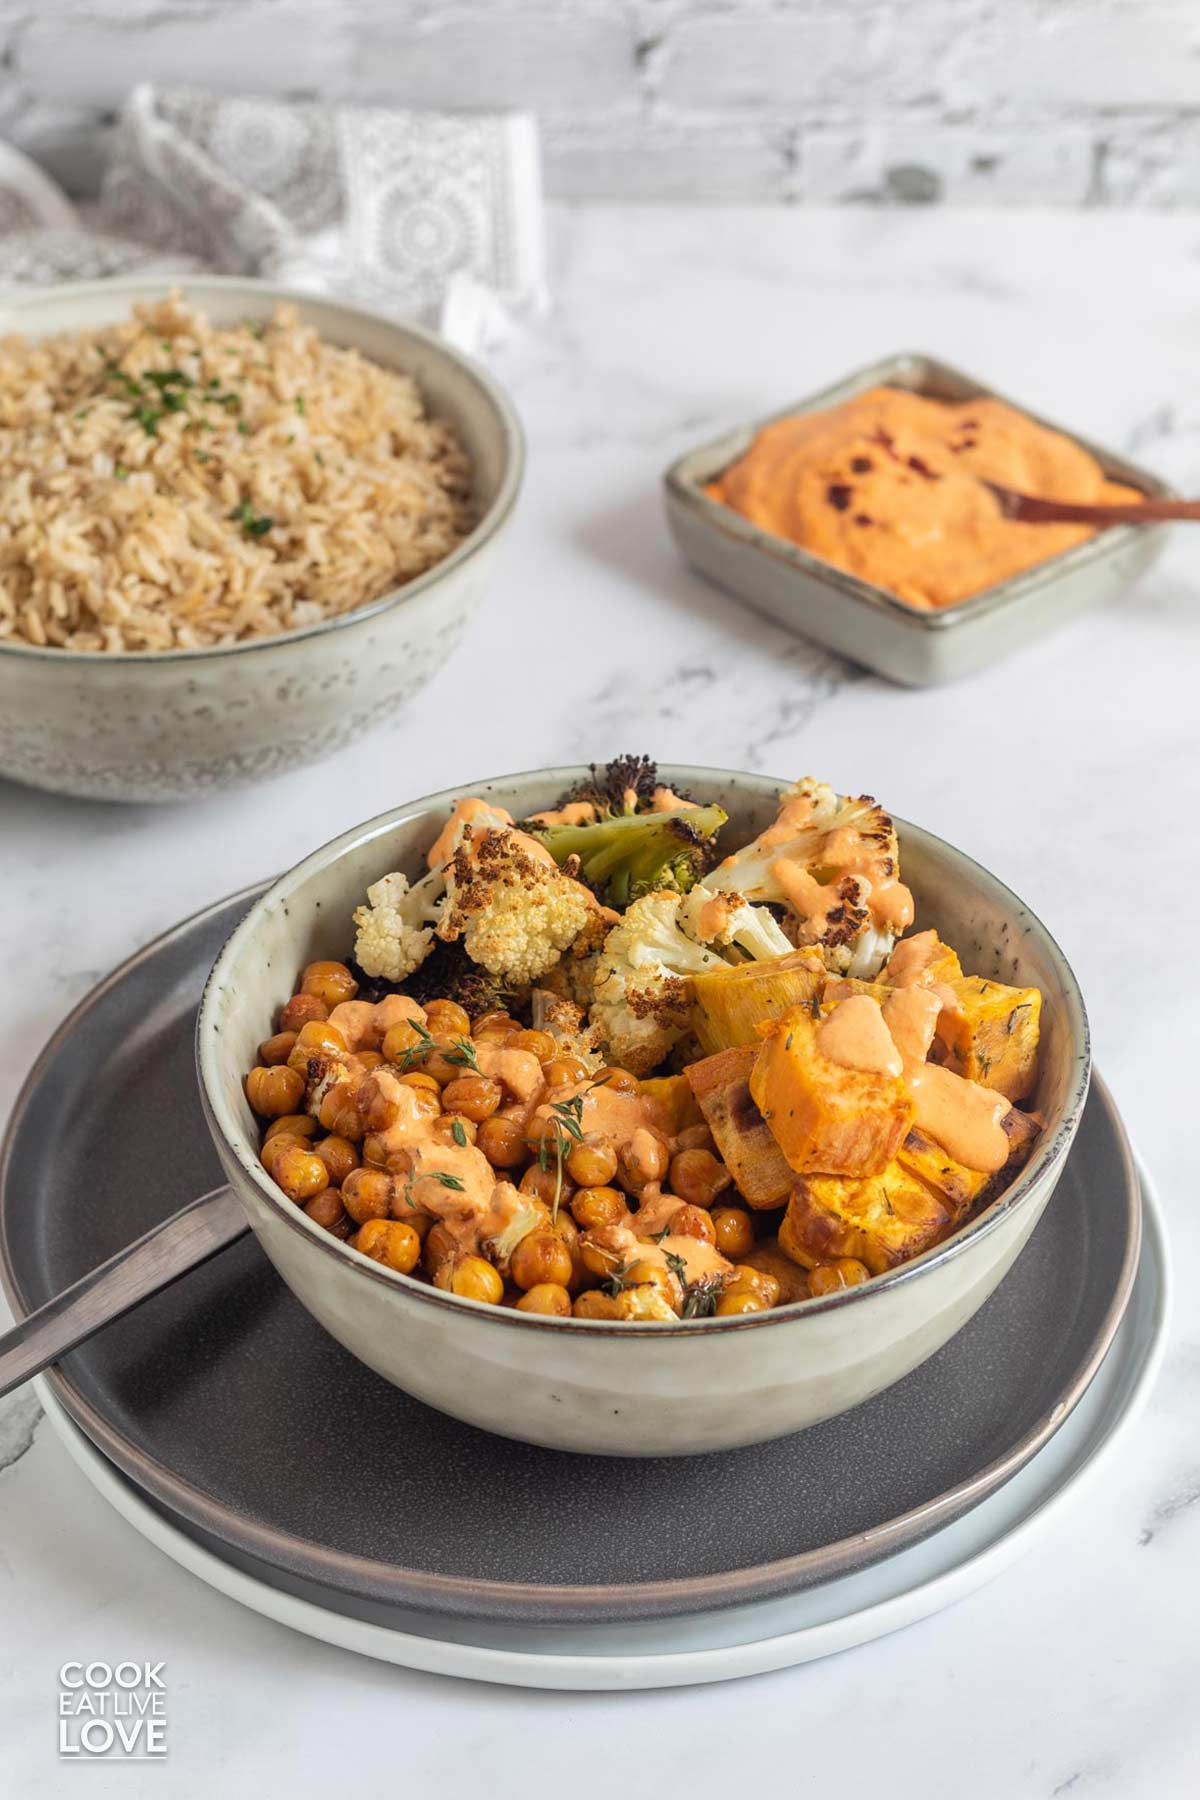 Mediterranean roasted vegetables and chickpeas in a bowl on the table.